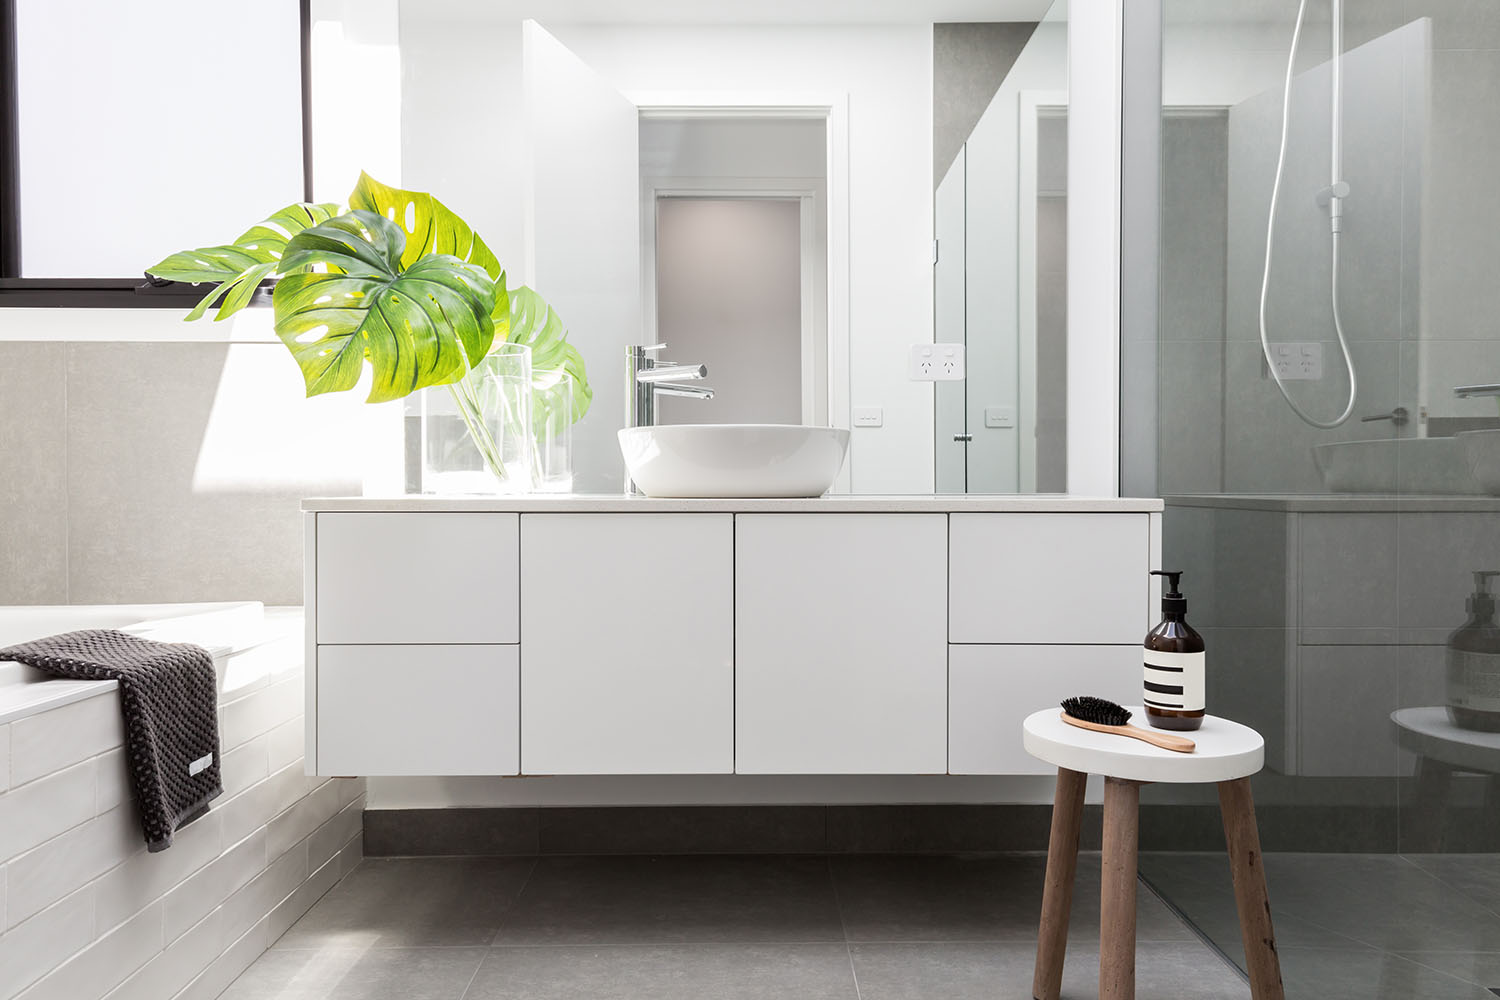 Bathroom Renovations How Much, How Much Does A Bathroom Renovation Cost In Melbourne